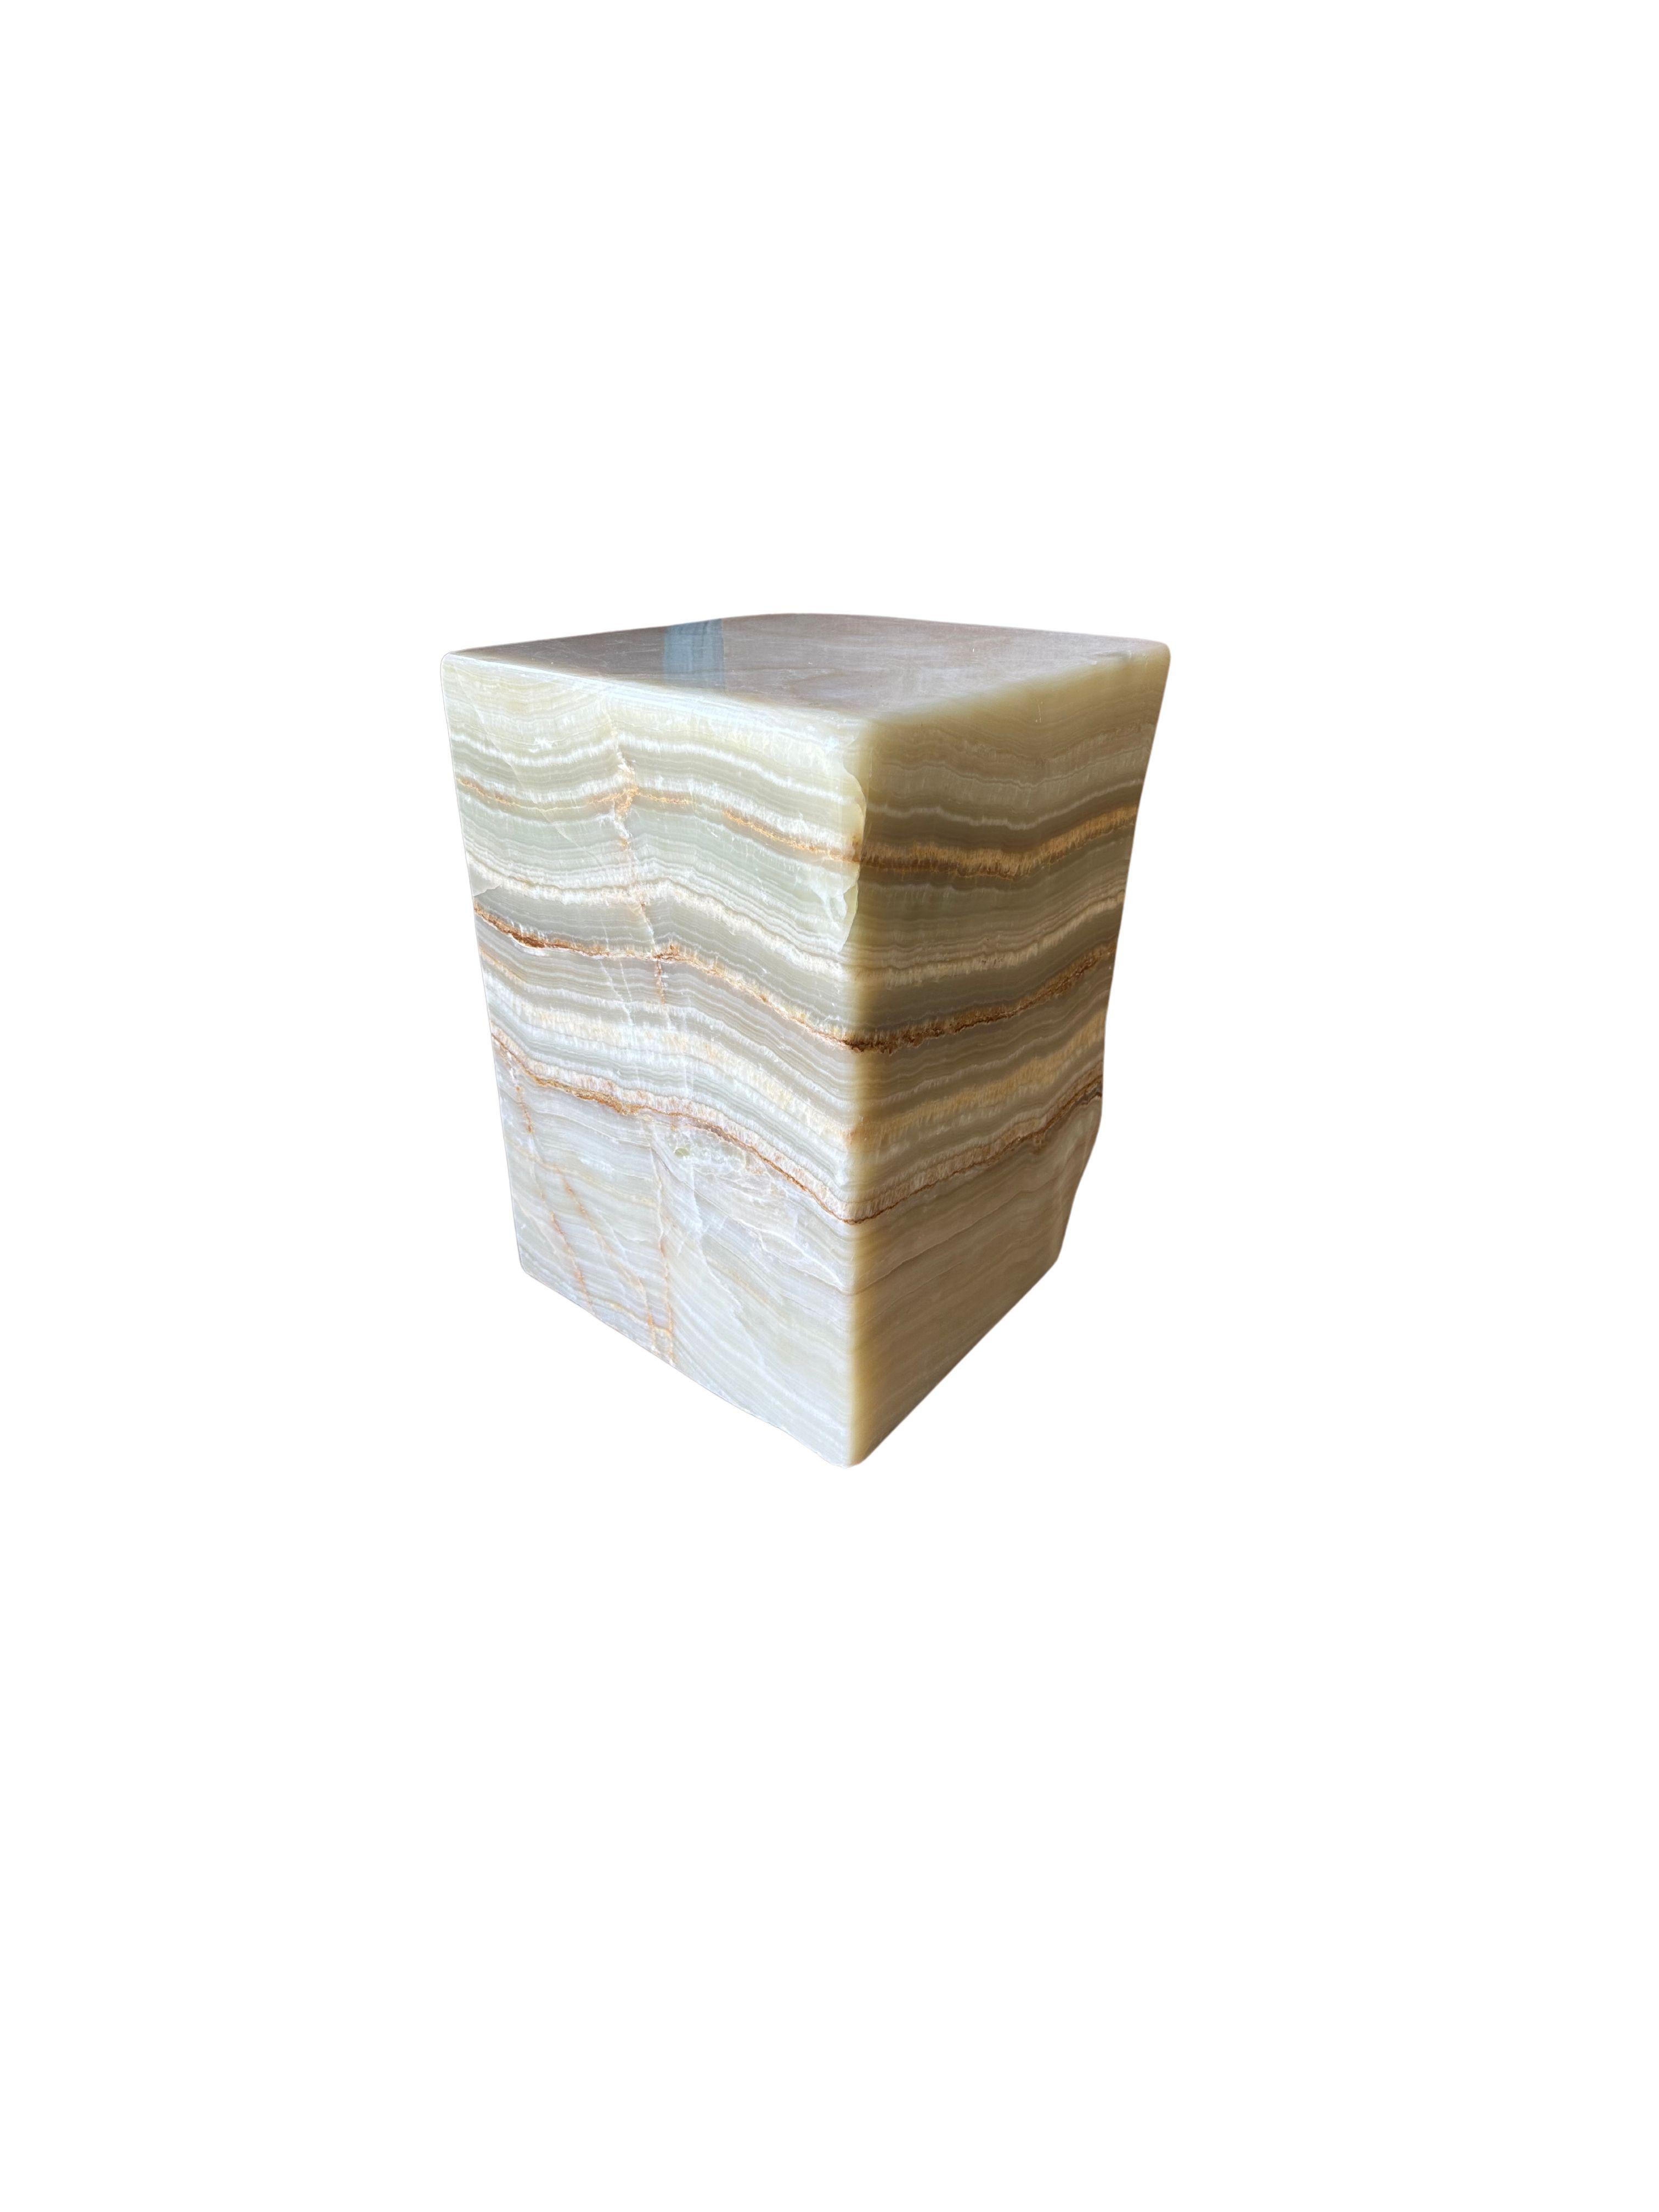 Organic Modern Jupiter Onyx Marble Side Table with Stunning Textures, Modern Organic For Sale